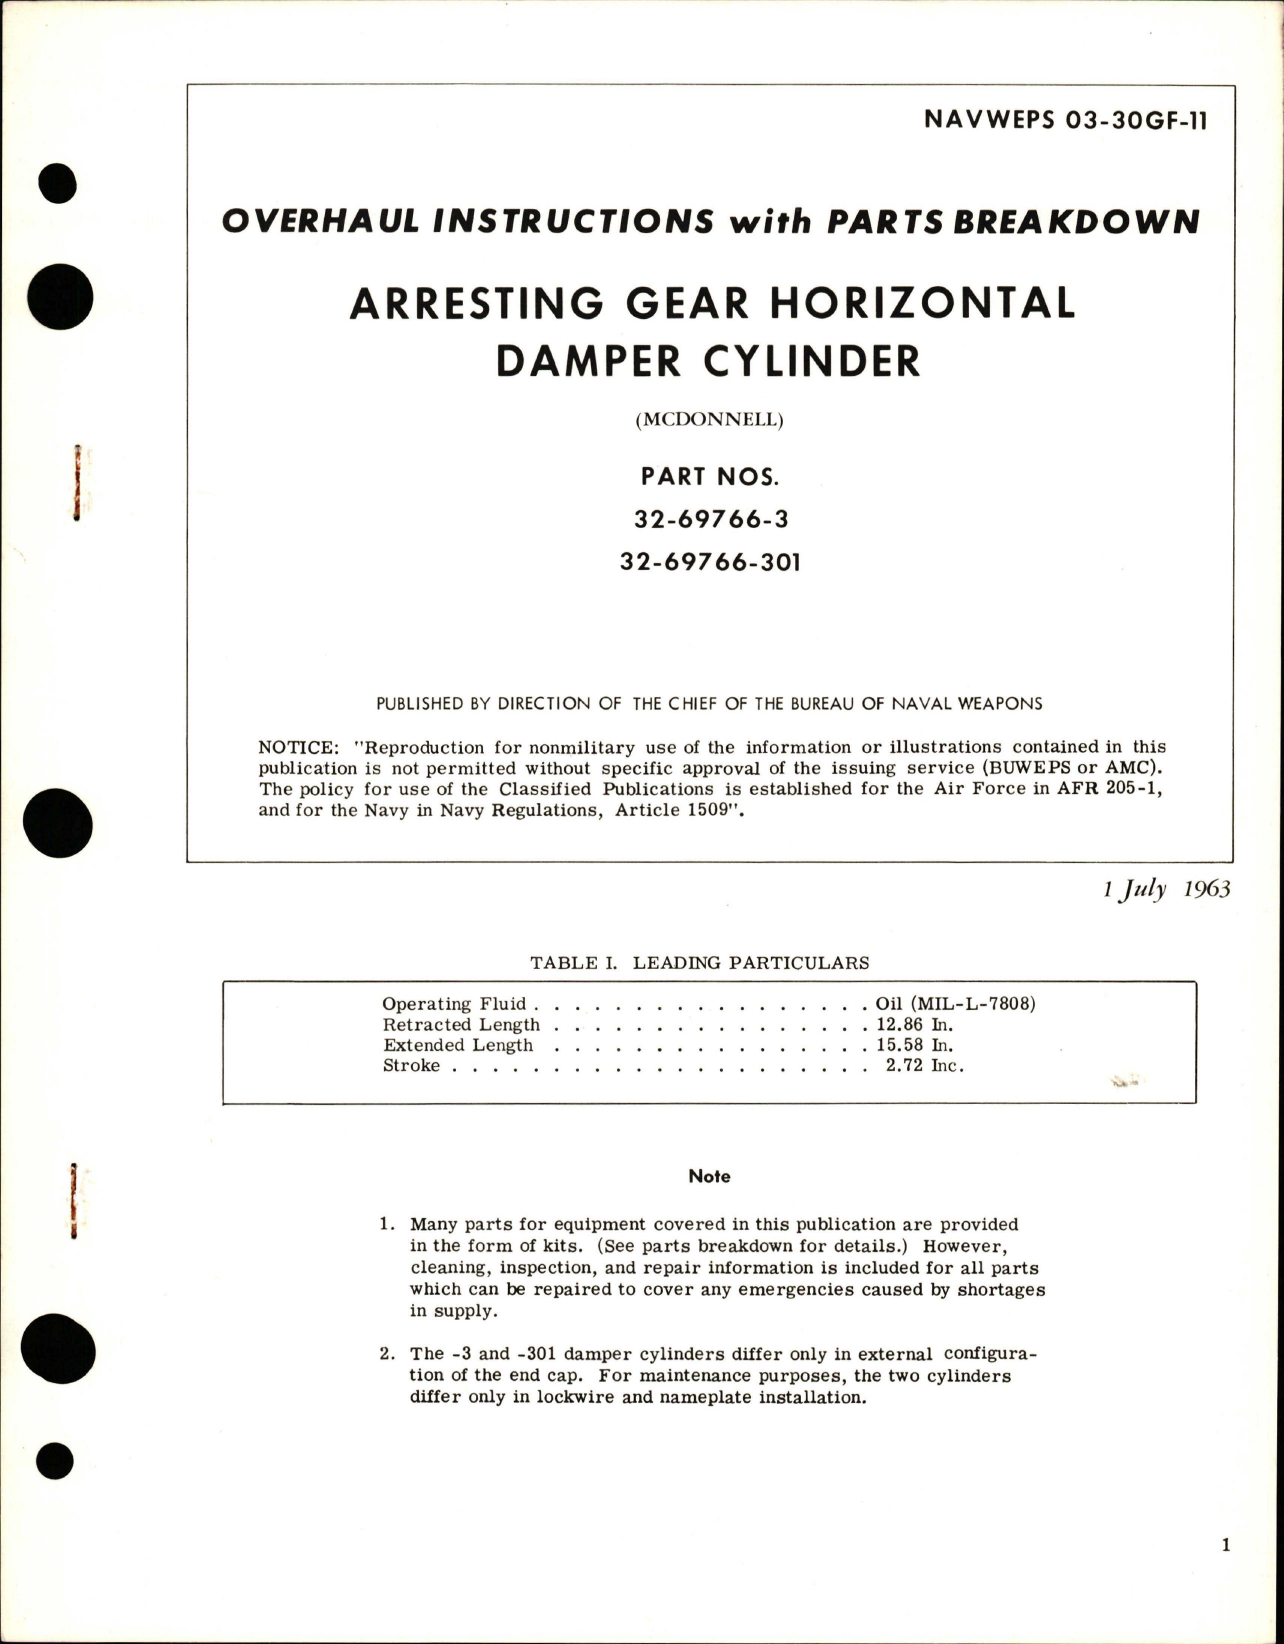 Sample page 1 from AirCorps Library document: Overhaul Instructions with Parts Breakdown for Arresting Gear Horizontal Damper Cylinder - Part 32-69766-3 and 32-69766-301